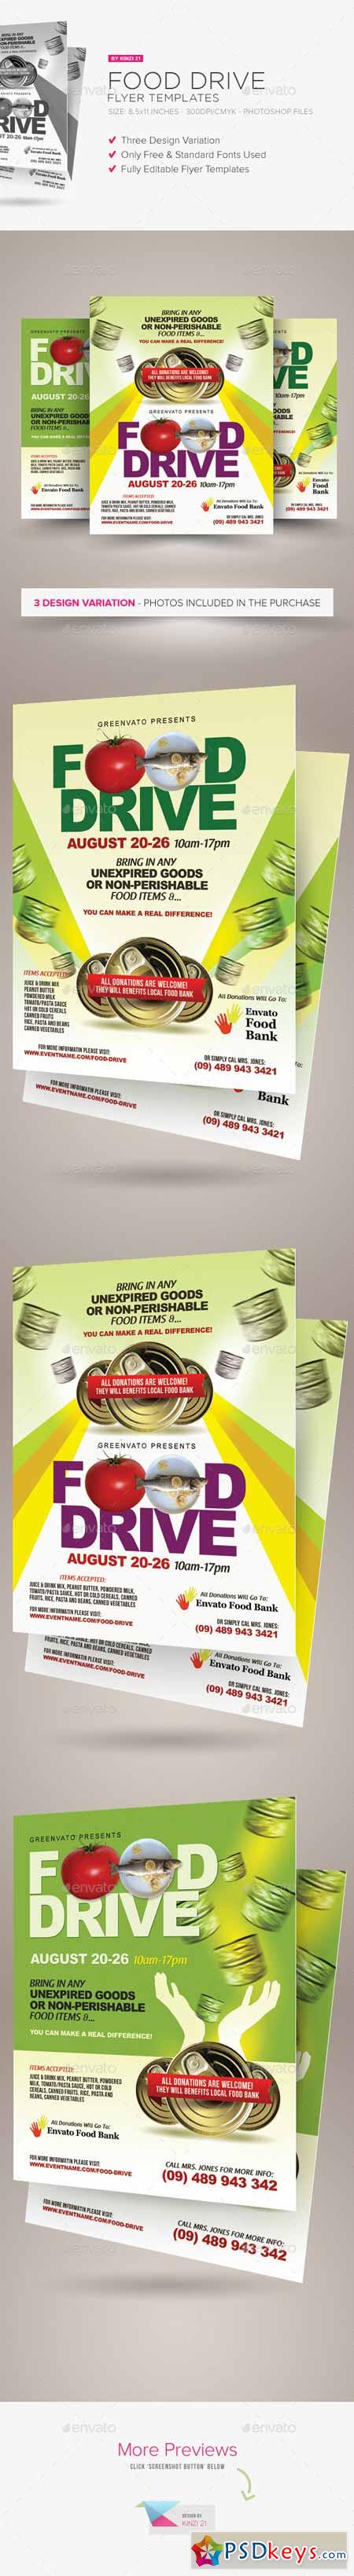 Food Drive Flyer Templates 11493589